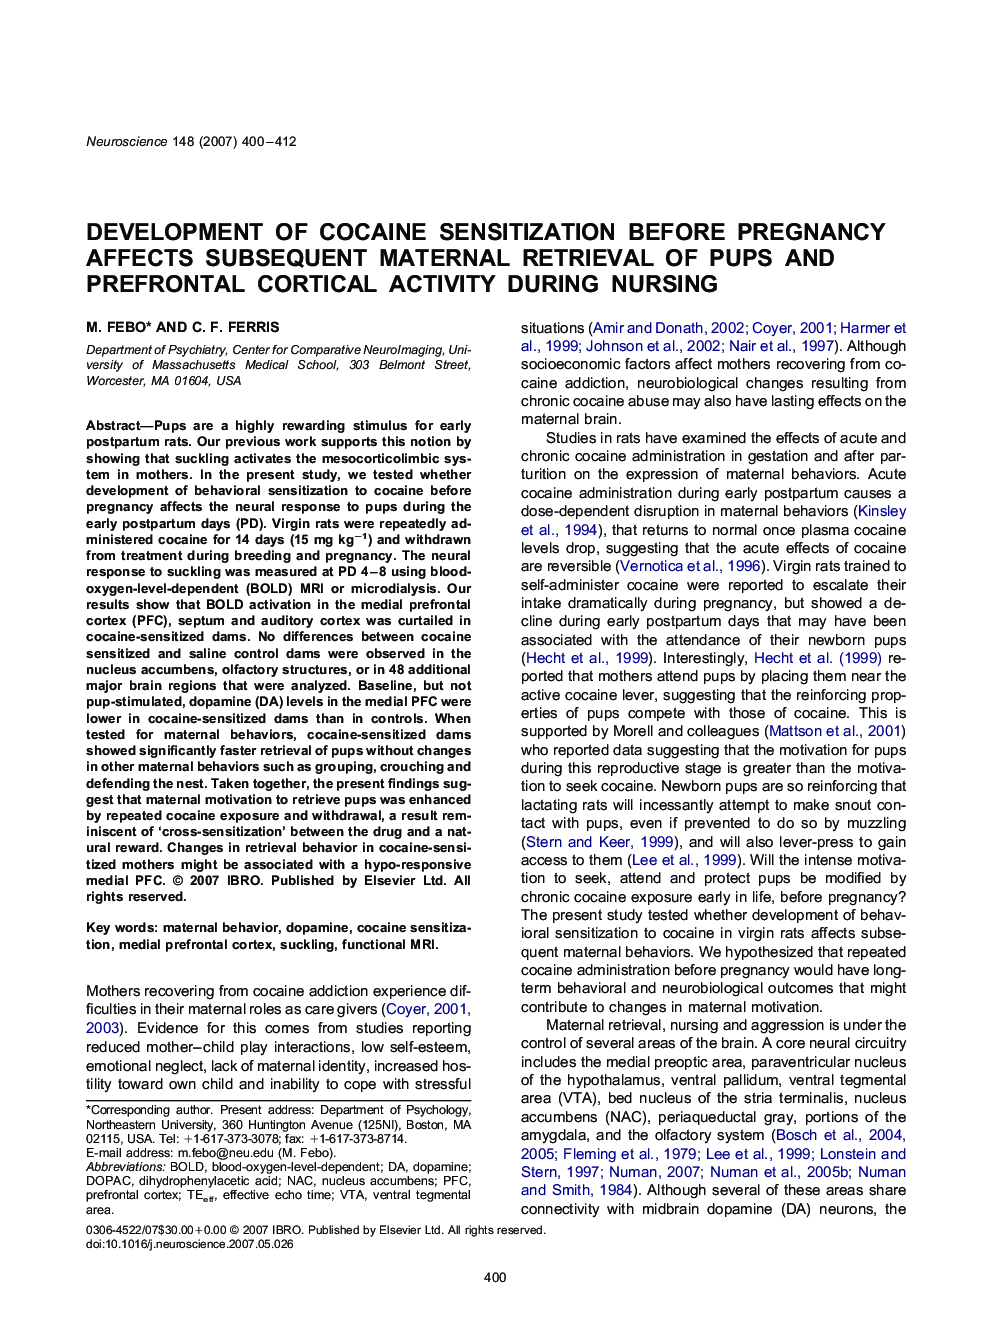 Development of cocaine sensitization before pregnancy affects subsequent maternal retrieval of pups and prefrontal cortical activity during nursing